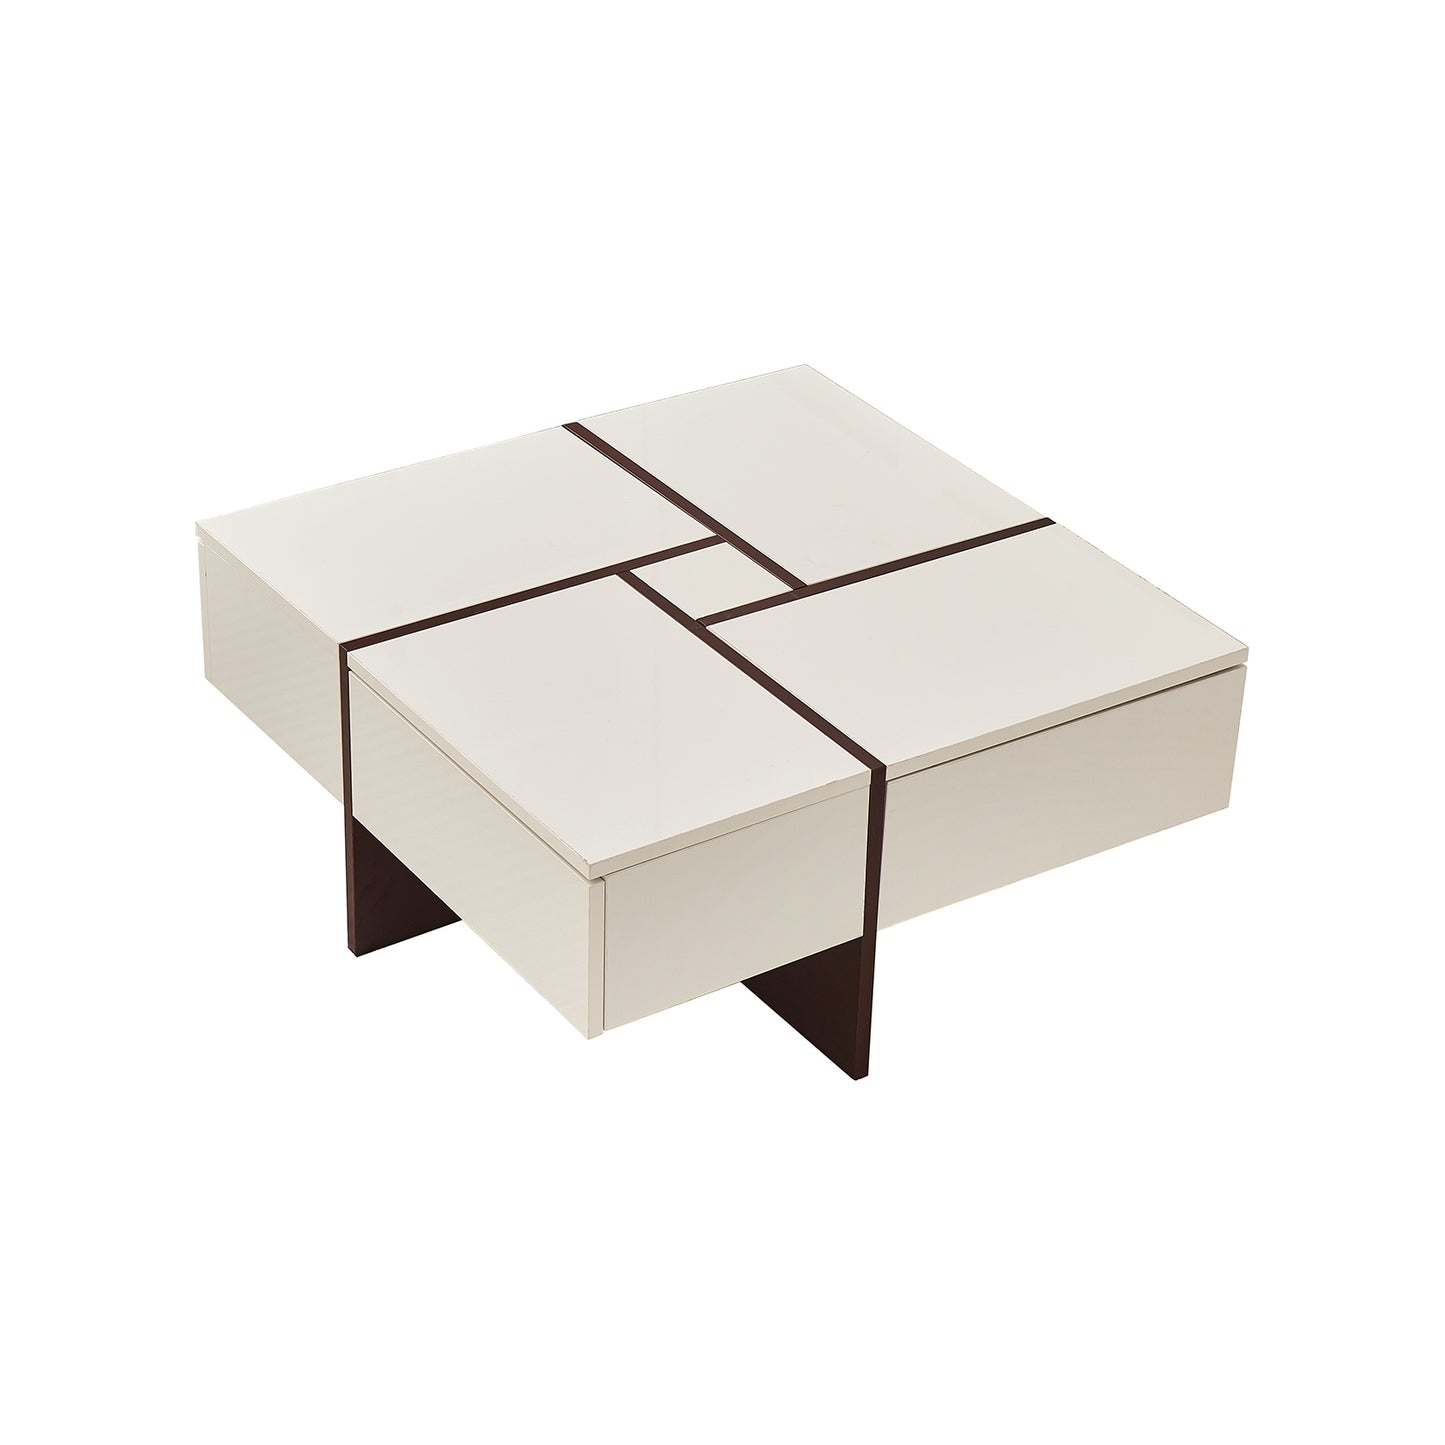 Elegant White & Walnut Square Coffee Table with 4 Drawers